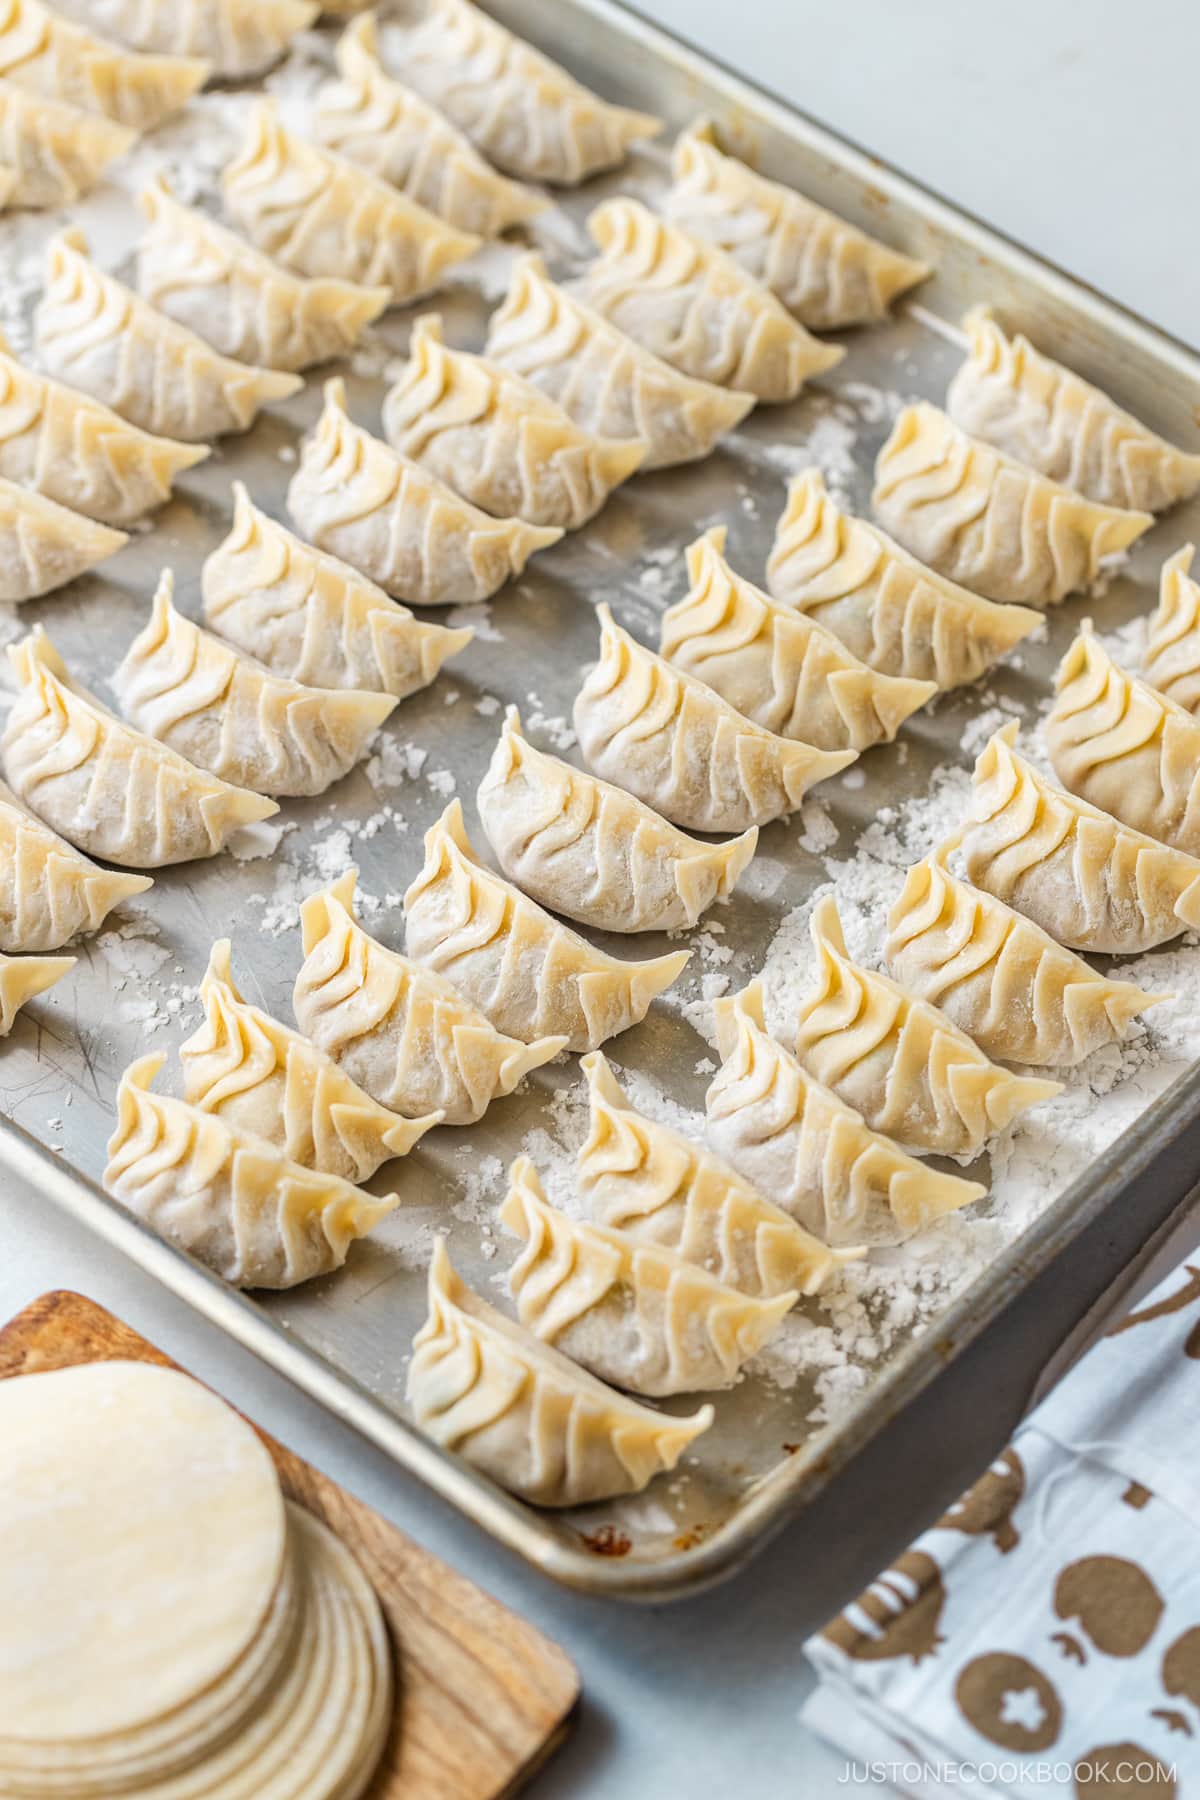 A baking sheet containing uncooked gyoza (Japanese potstickers or pan-fried dumplings)